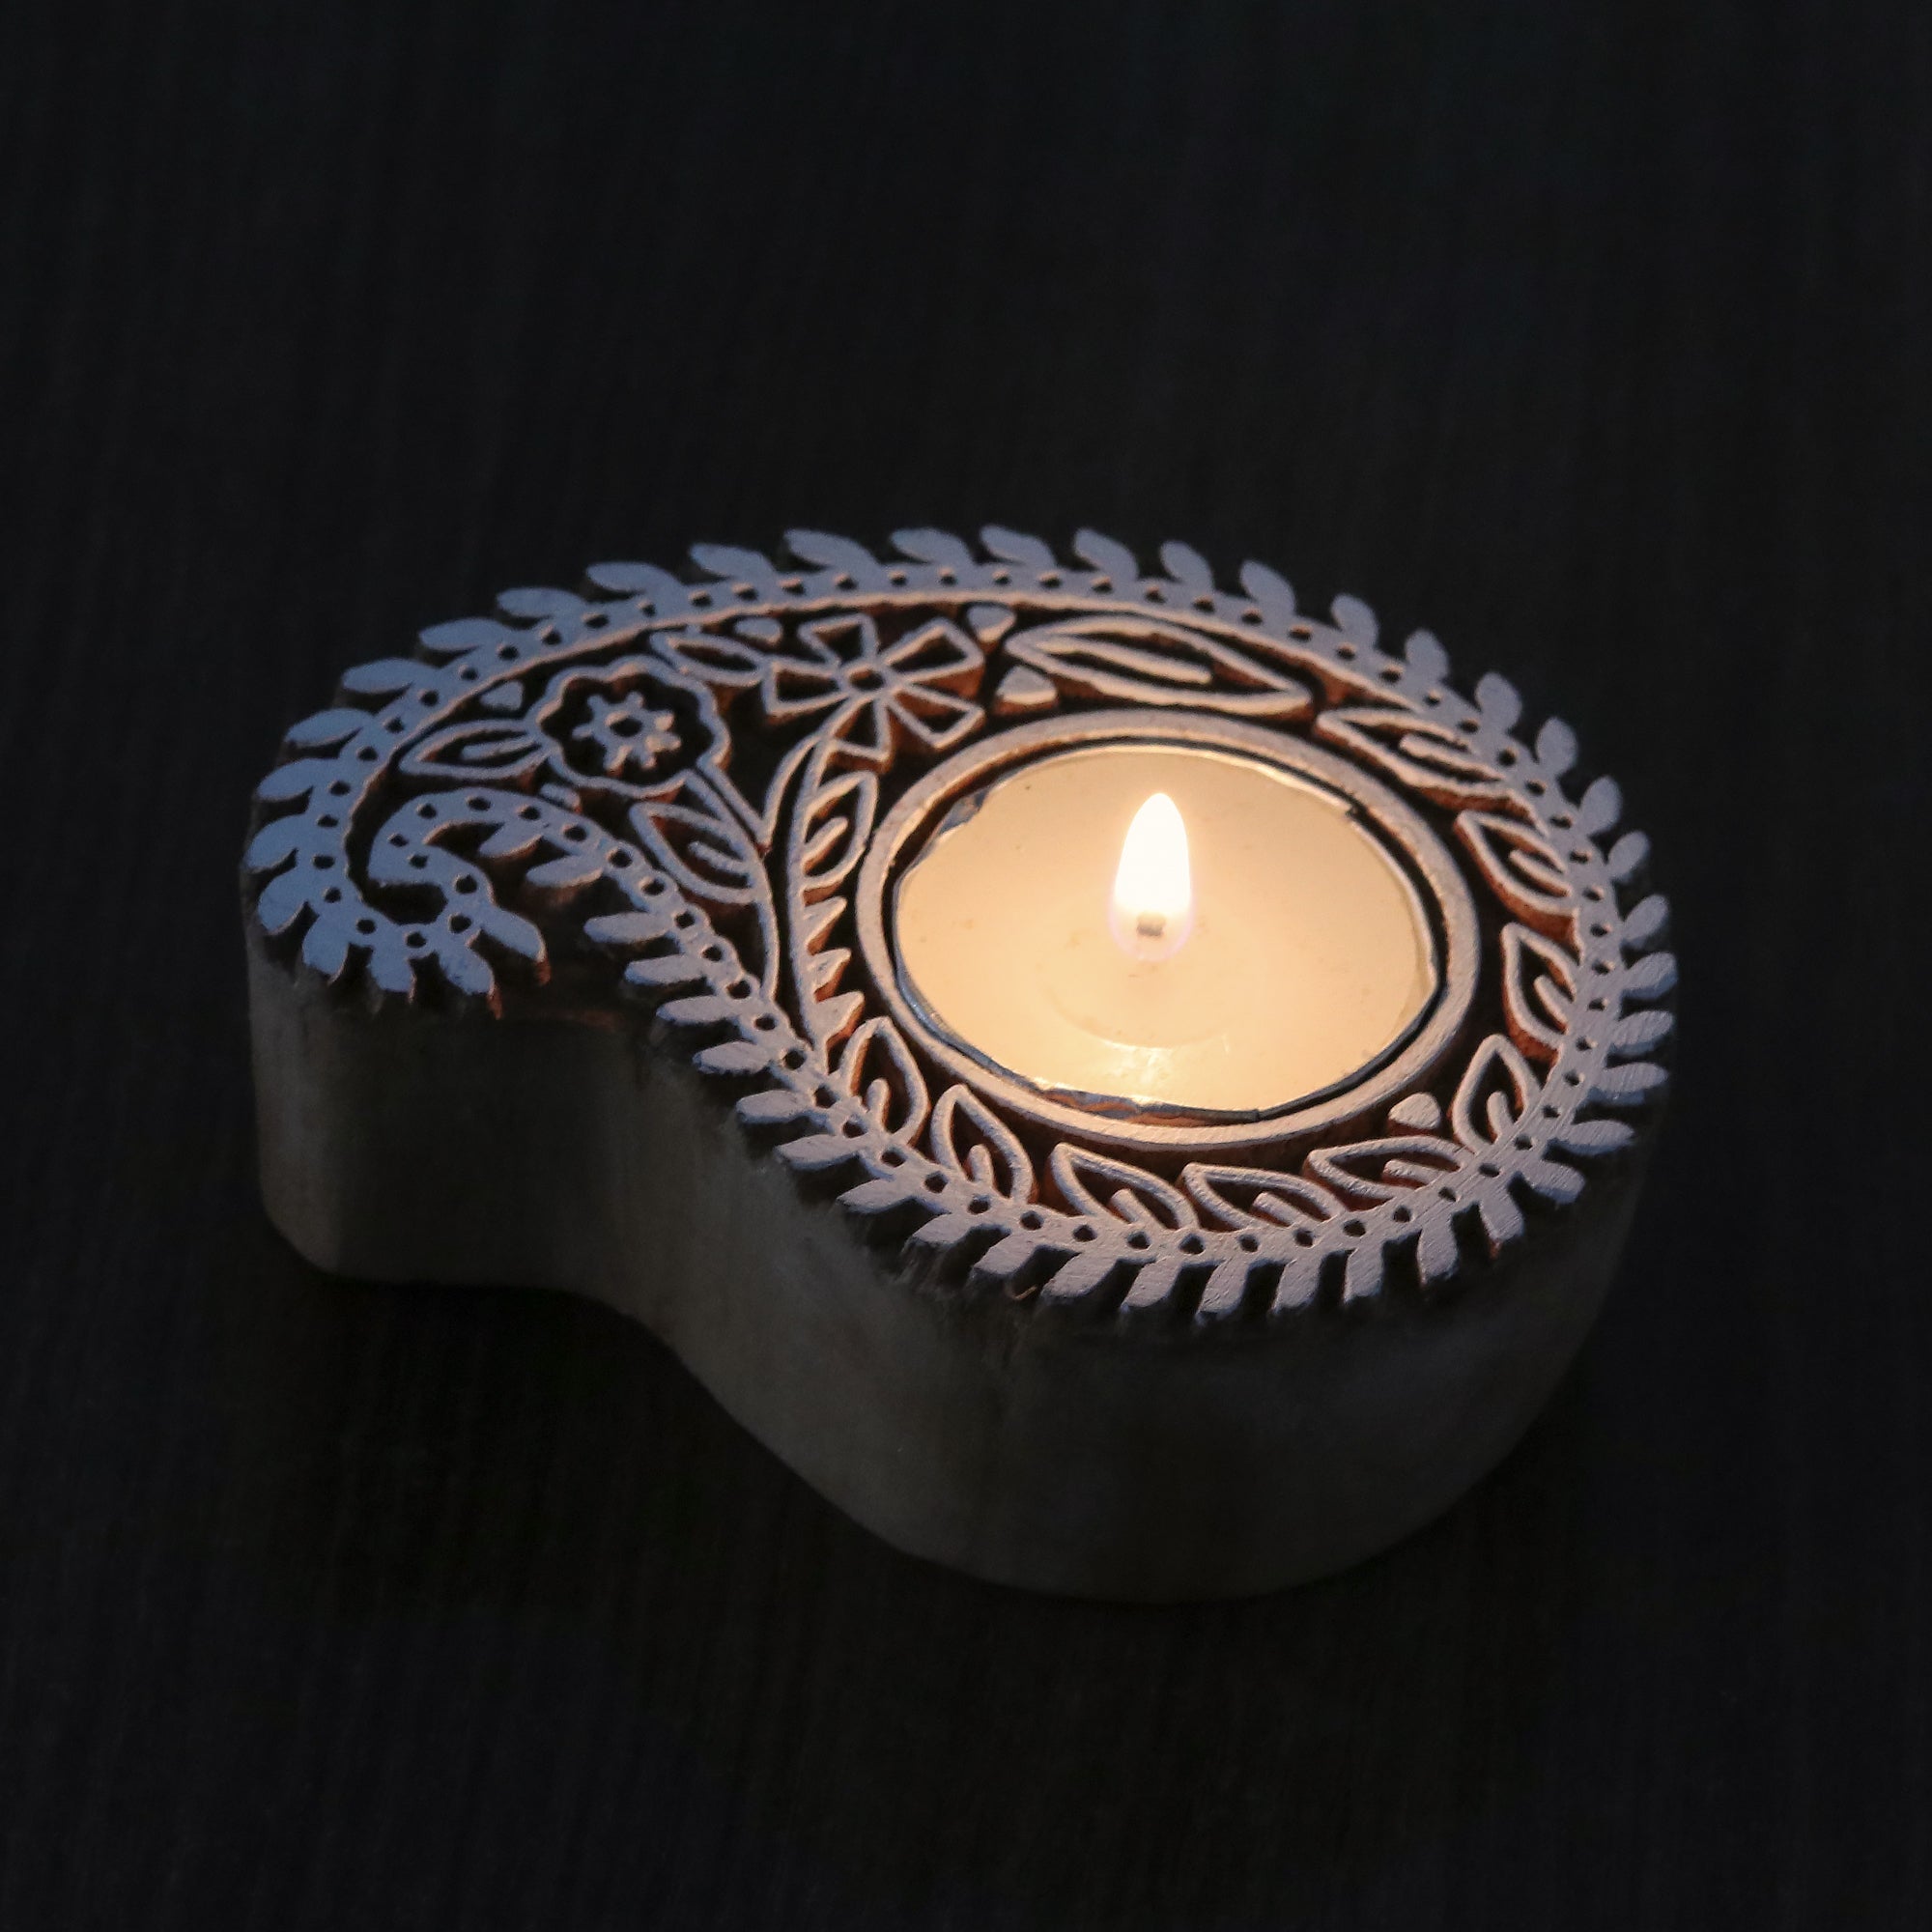 Wooden Printing Block & Candle Holder- Paisley Vine